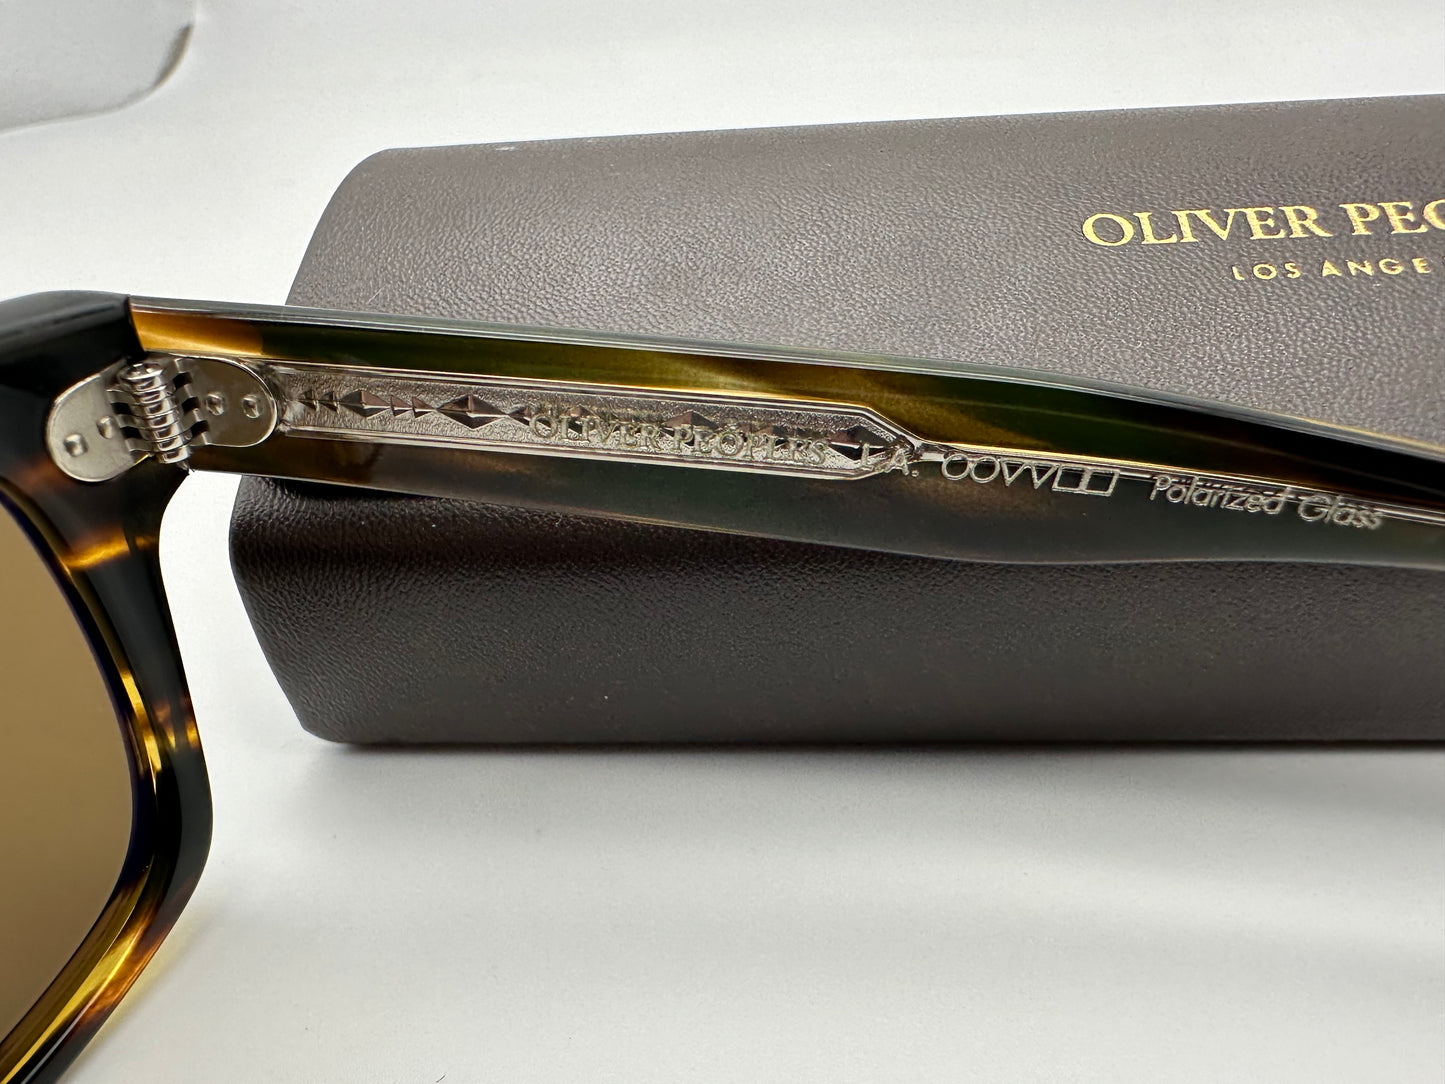 Oliver Peoples Oliver Sun 49mm OV 5393 1003557 Cocobolo True Brown Polarized Glass Lens Italy Preowned